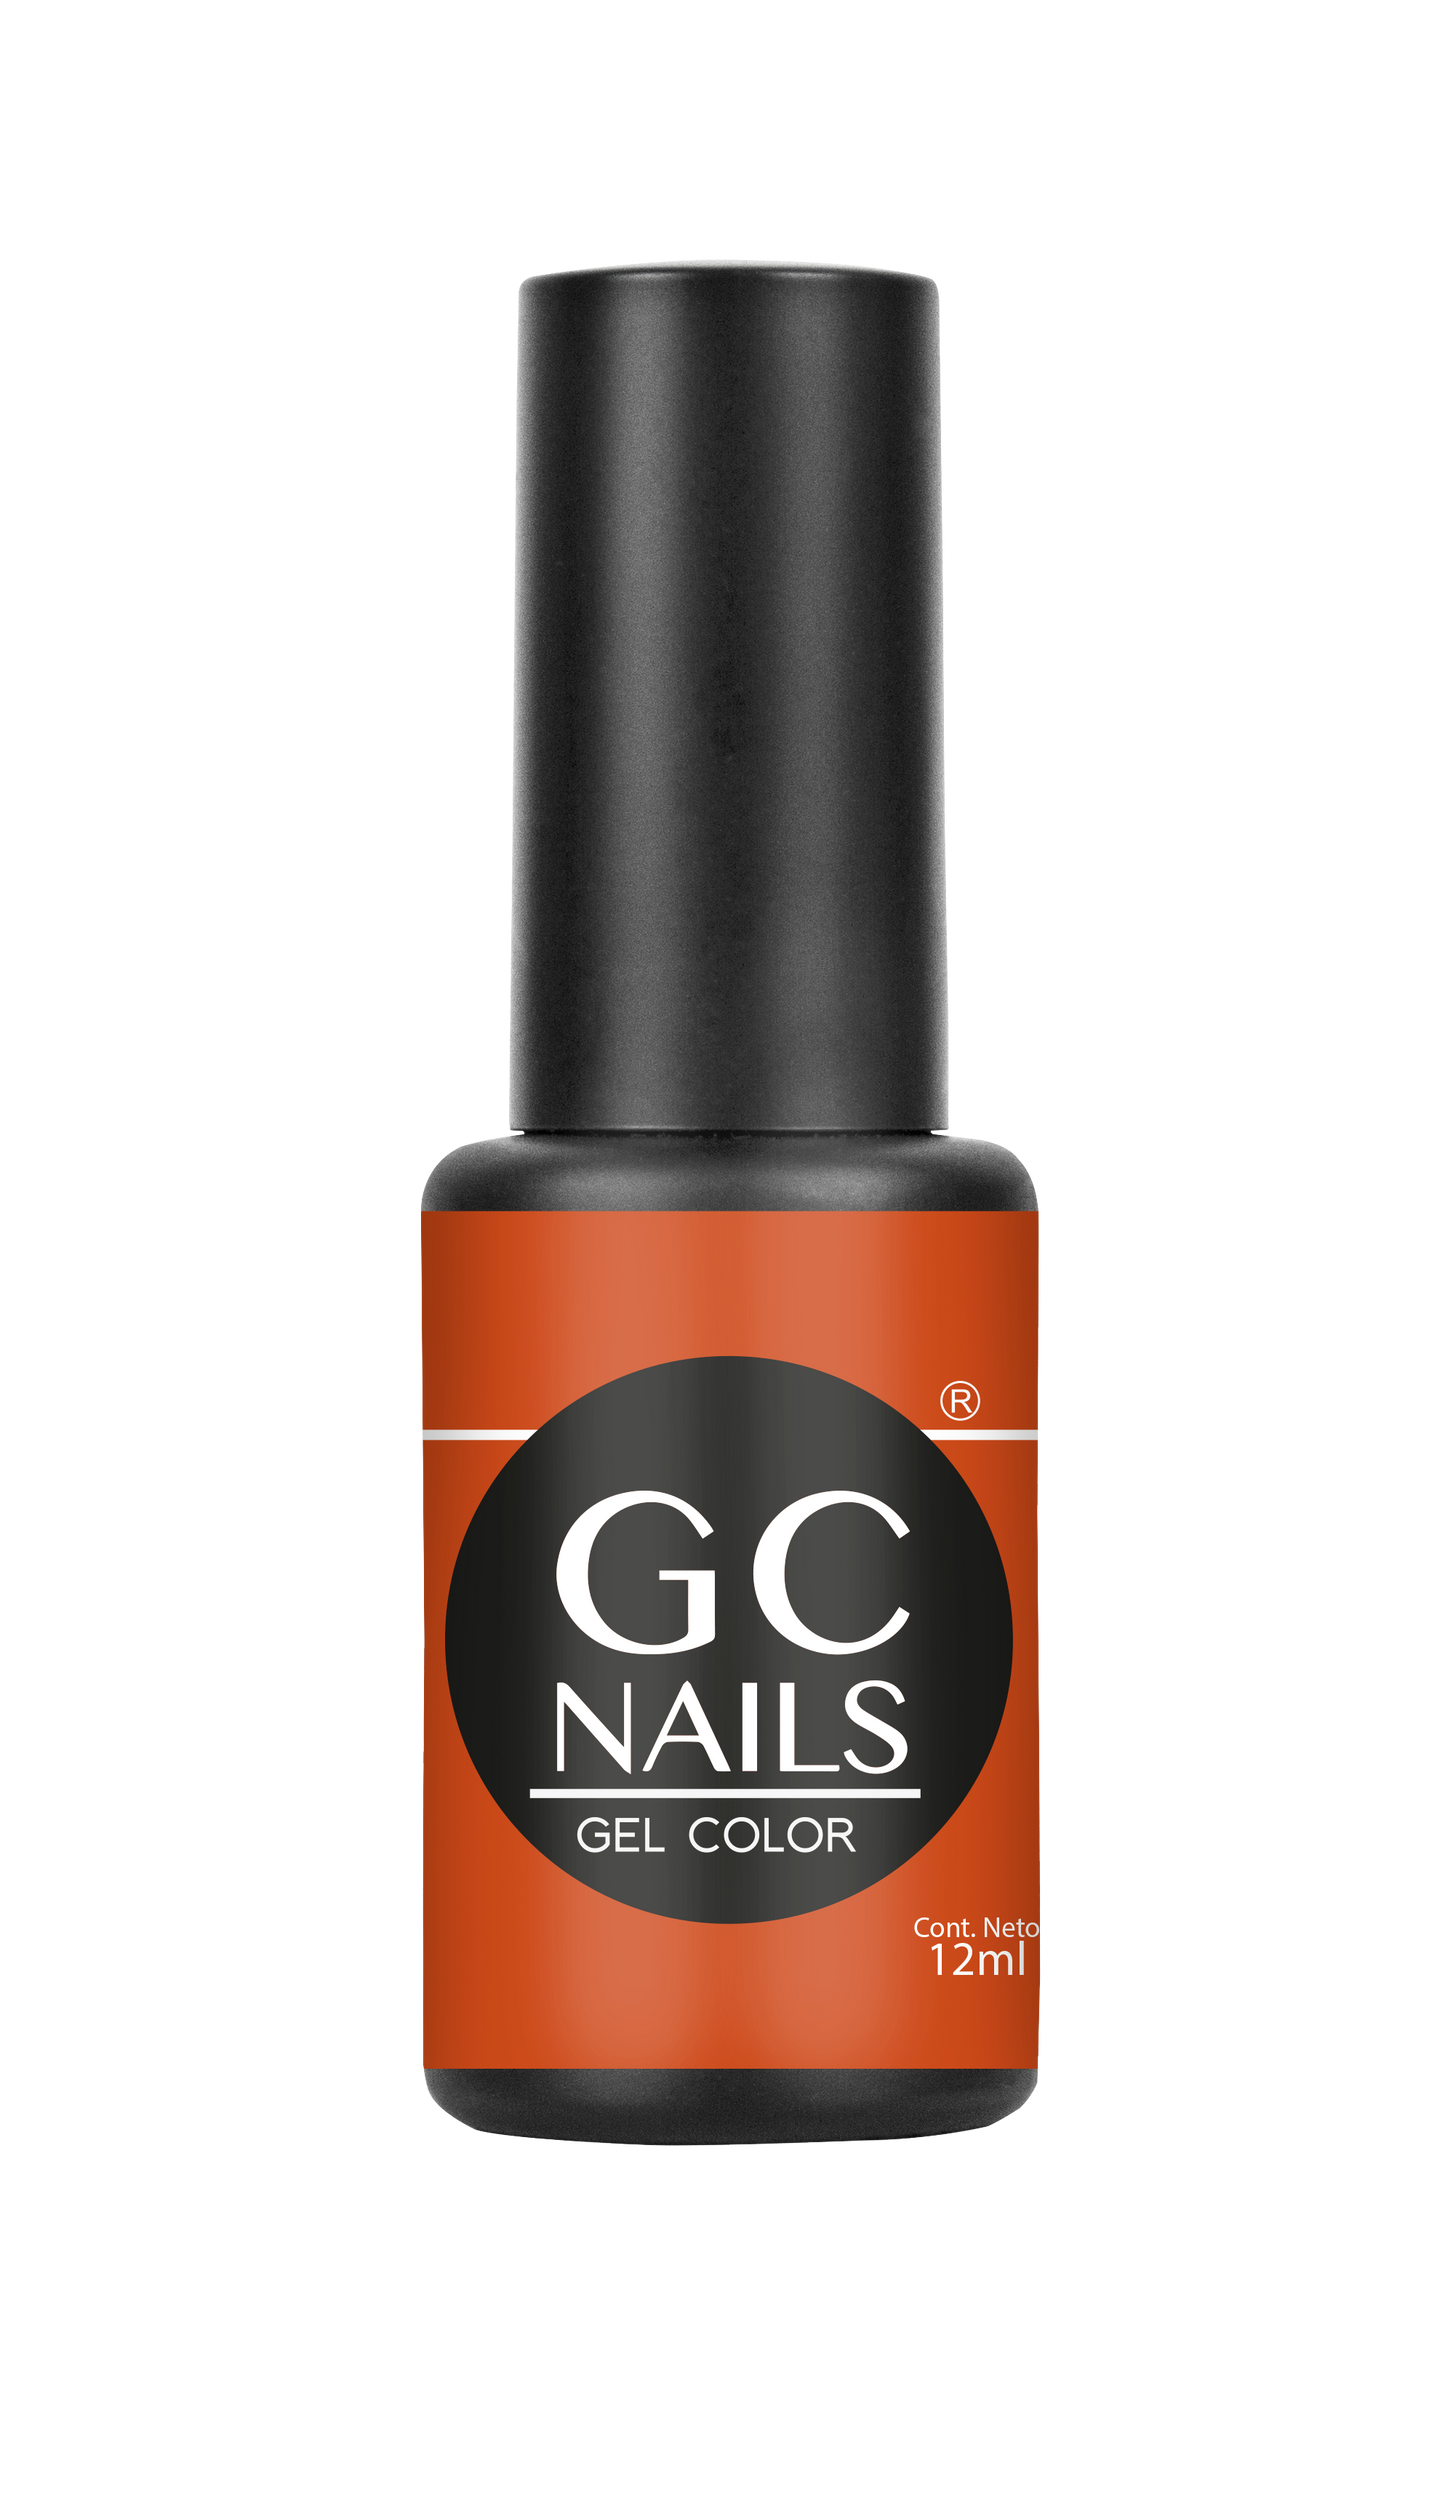 GC nails bel-color 12ml CHEDRON 64